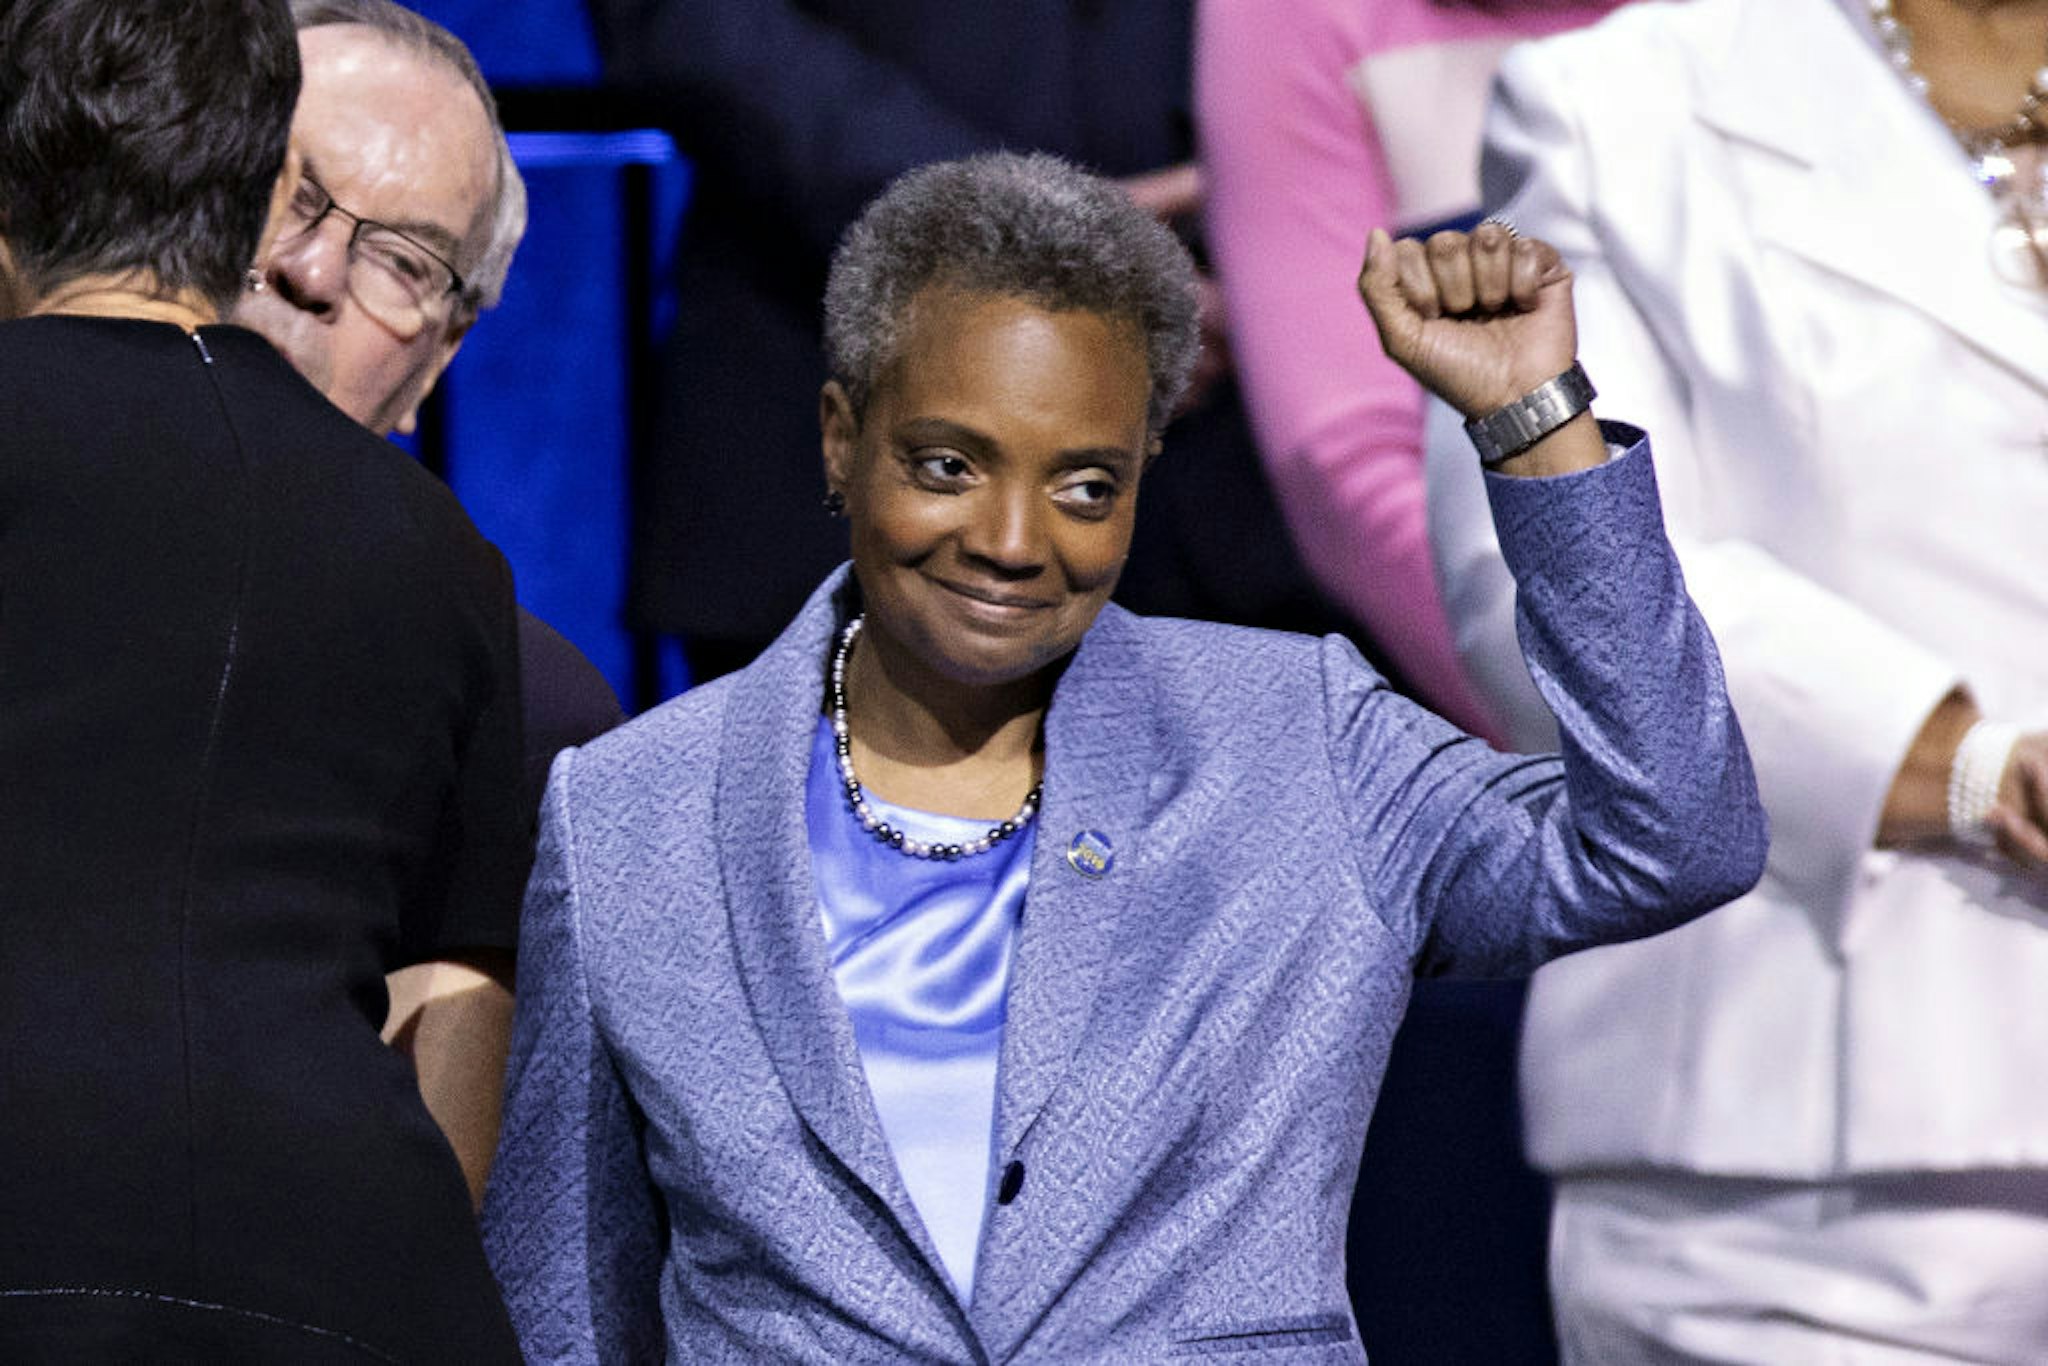 Lori Lightfoot, mayor of Chicago, gestures during an inauguration ceremony in Chicago, Illinois, U.S., on Monday, May 20, 2019.